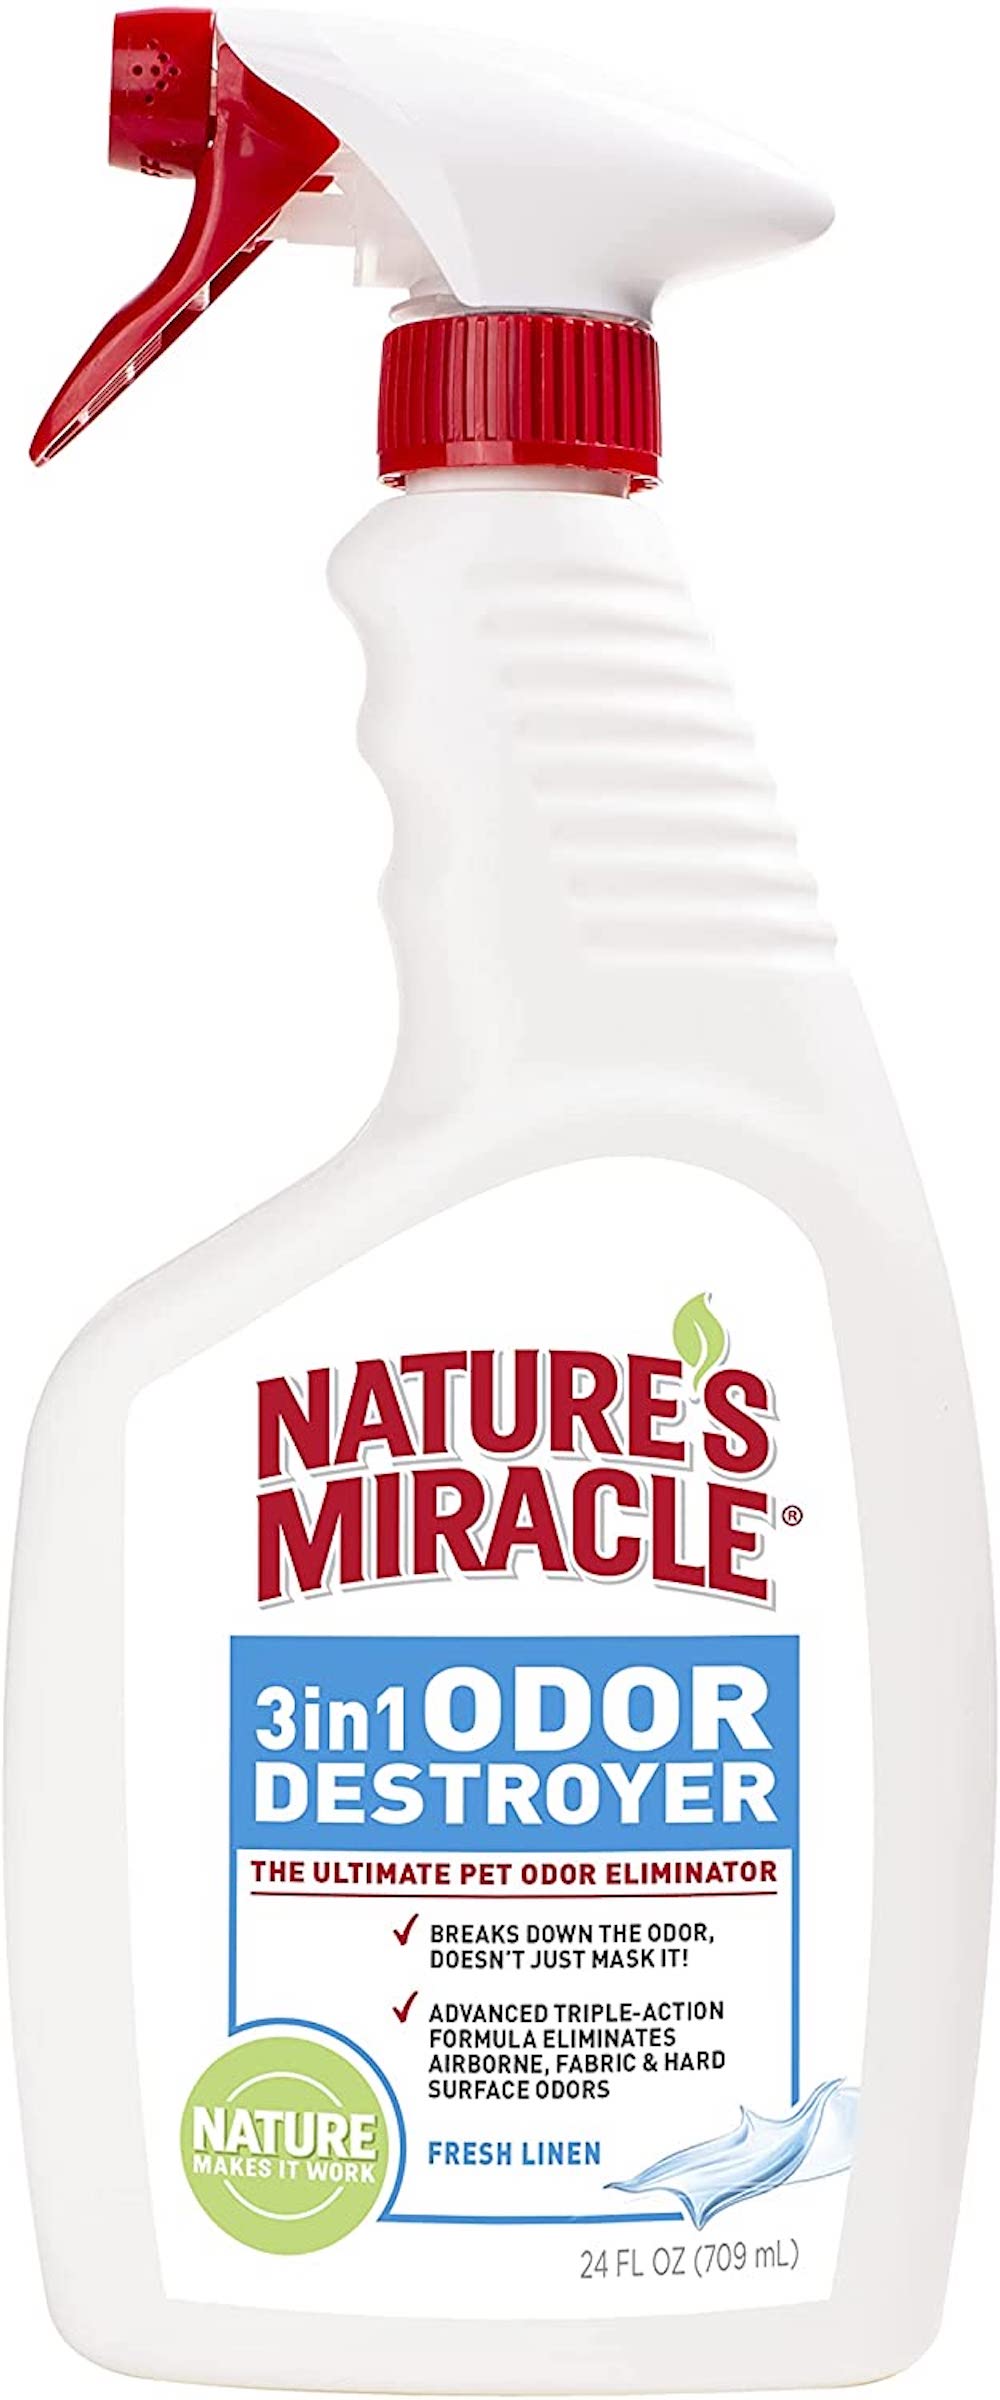 natures miracle